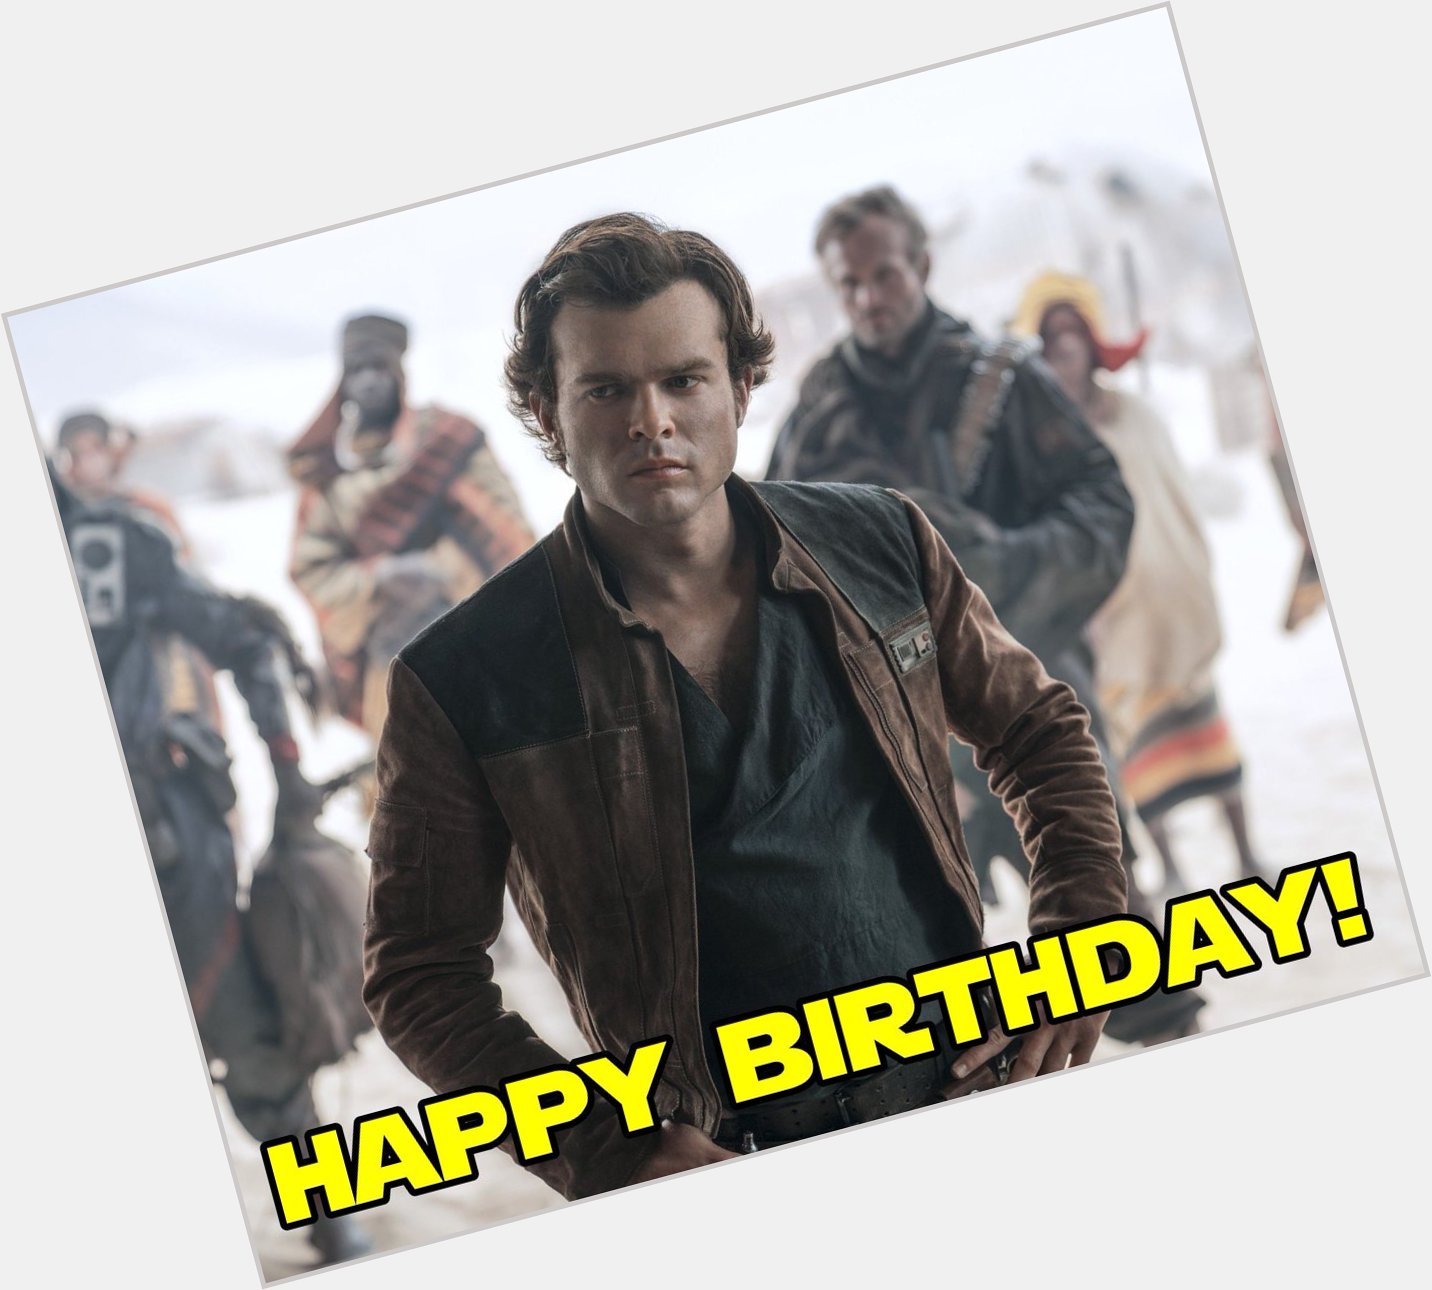 All of us at the SWU want to wish a very Happy Birthday to young Han Solo himself, Alden Ehrenreich! 